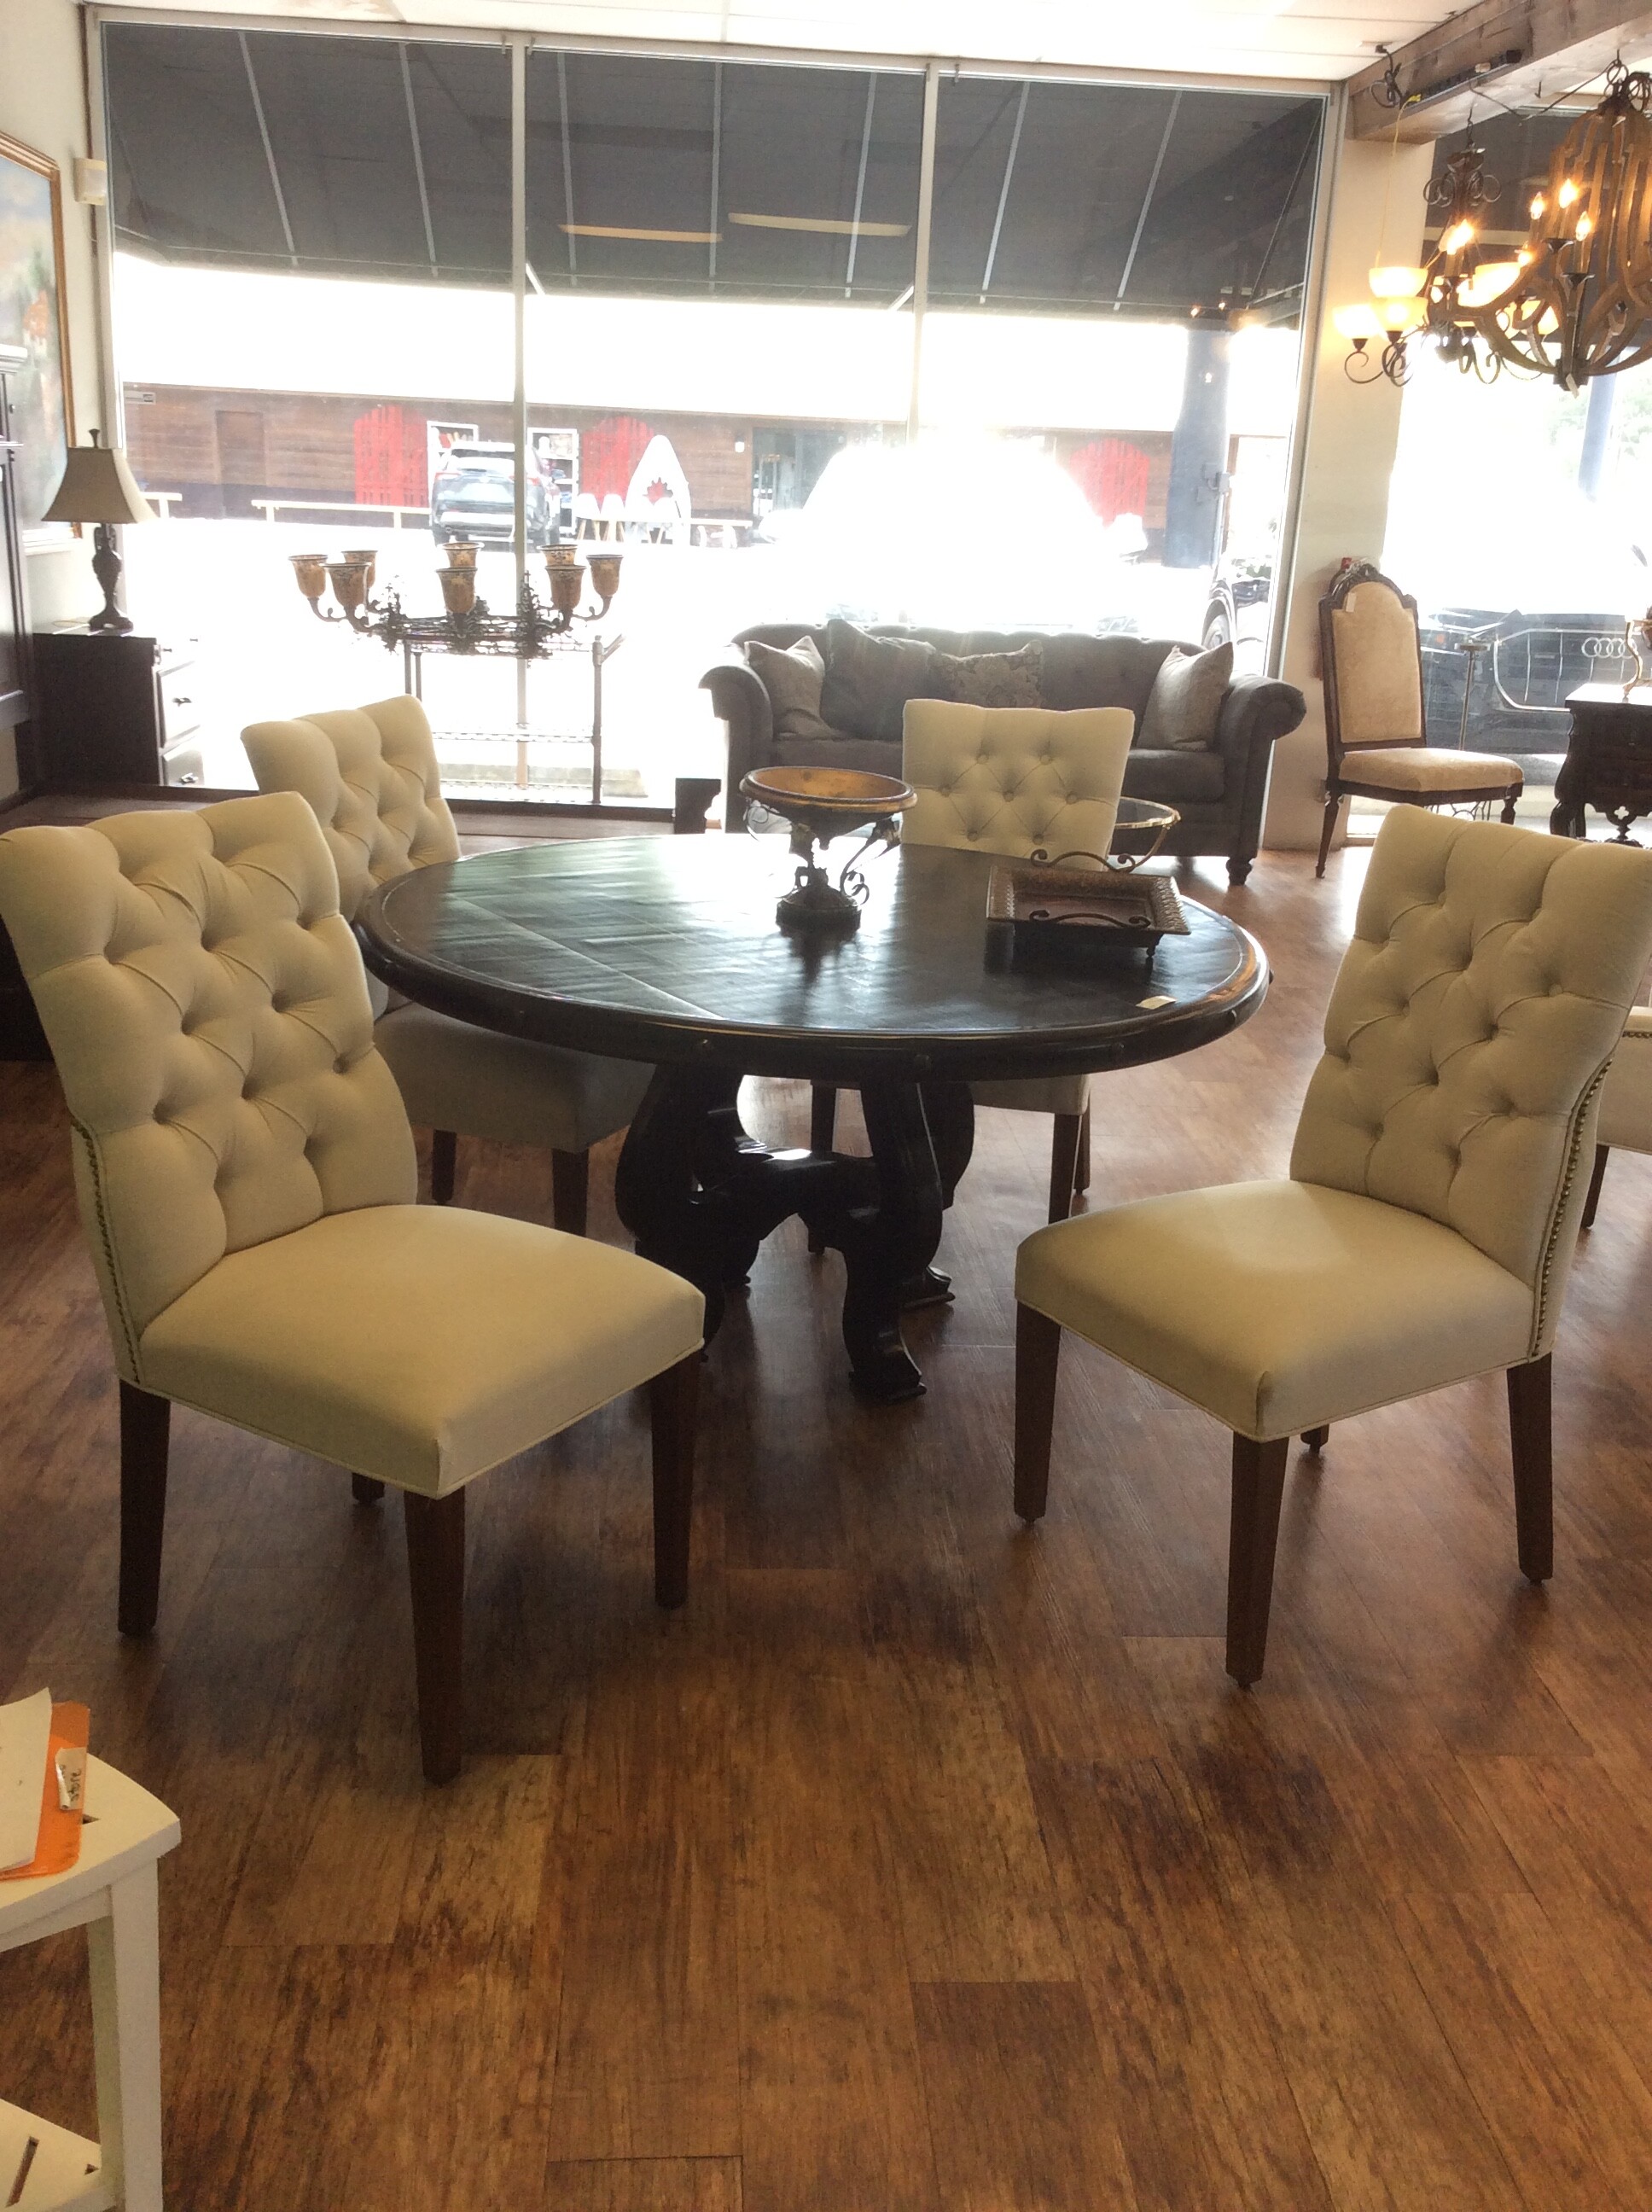 This is a set of 4 beige, upholsterd, tuffed dinning chairs. These chairs have dark brown legs and nailhead trim.